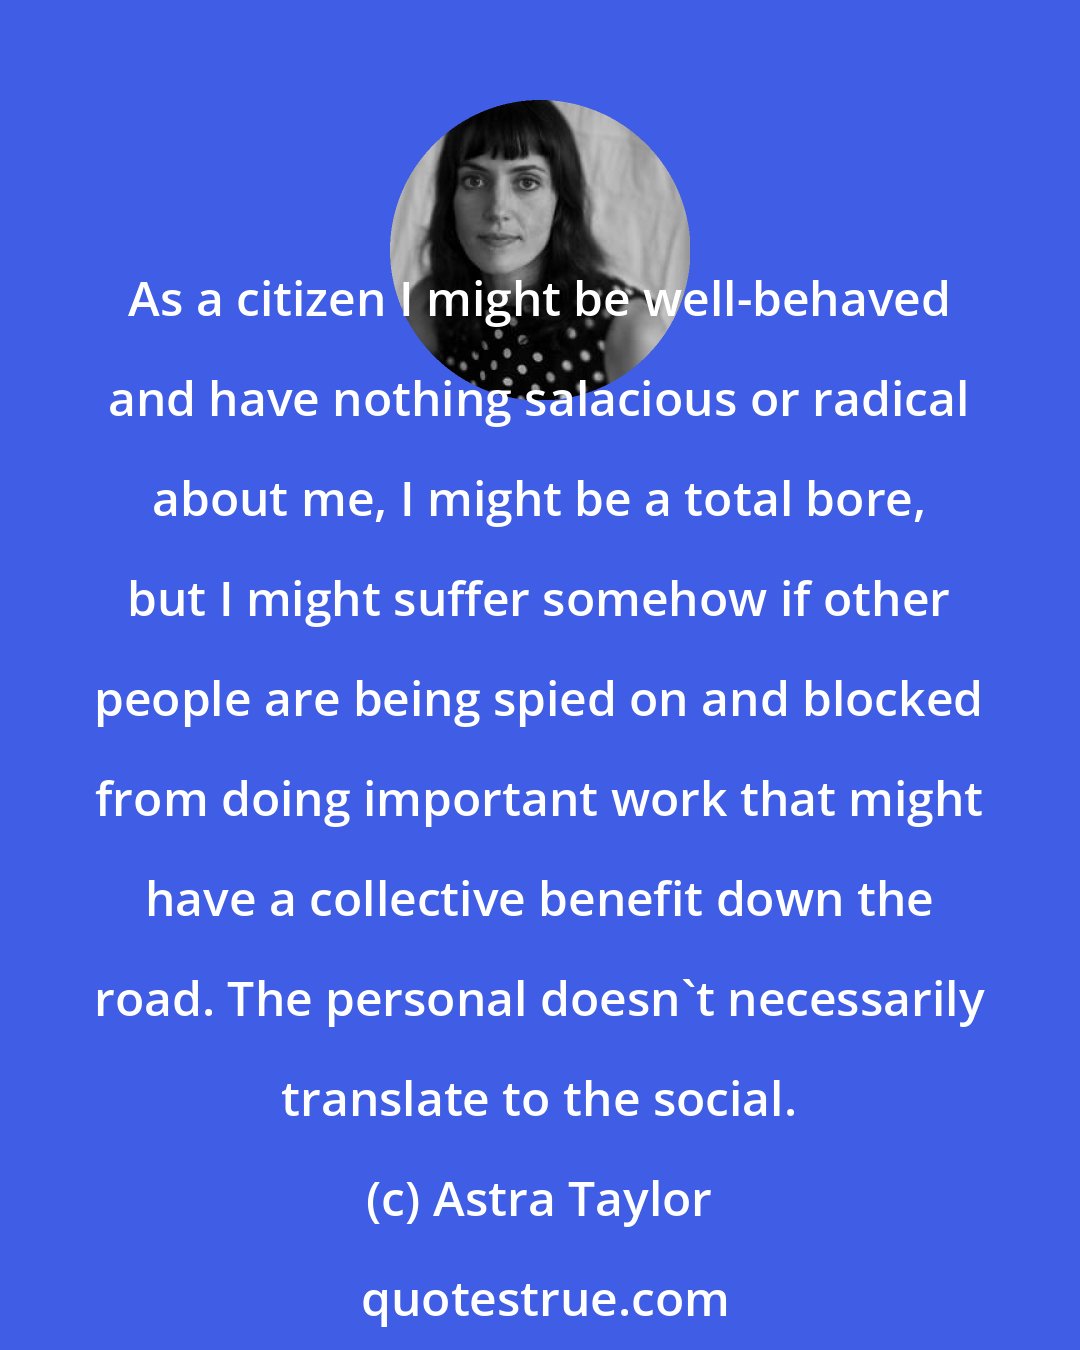 Astra Taylor: As a citizen I might be well-behaved and have nothing salacious or radical about me, I might be a total bore, but I might suffer somehow if other people are being spied on and blocked from doing important work that might have a collective benefit down the road. The personal doesn't necessarily translate to the social.